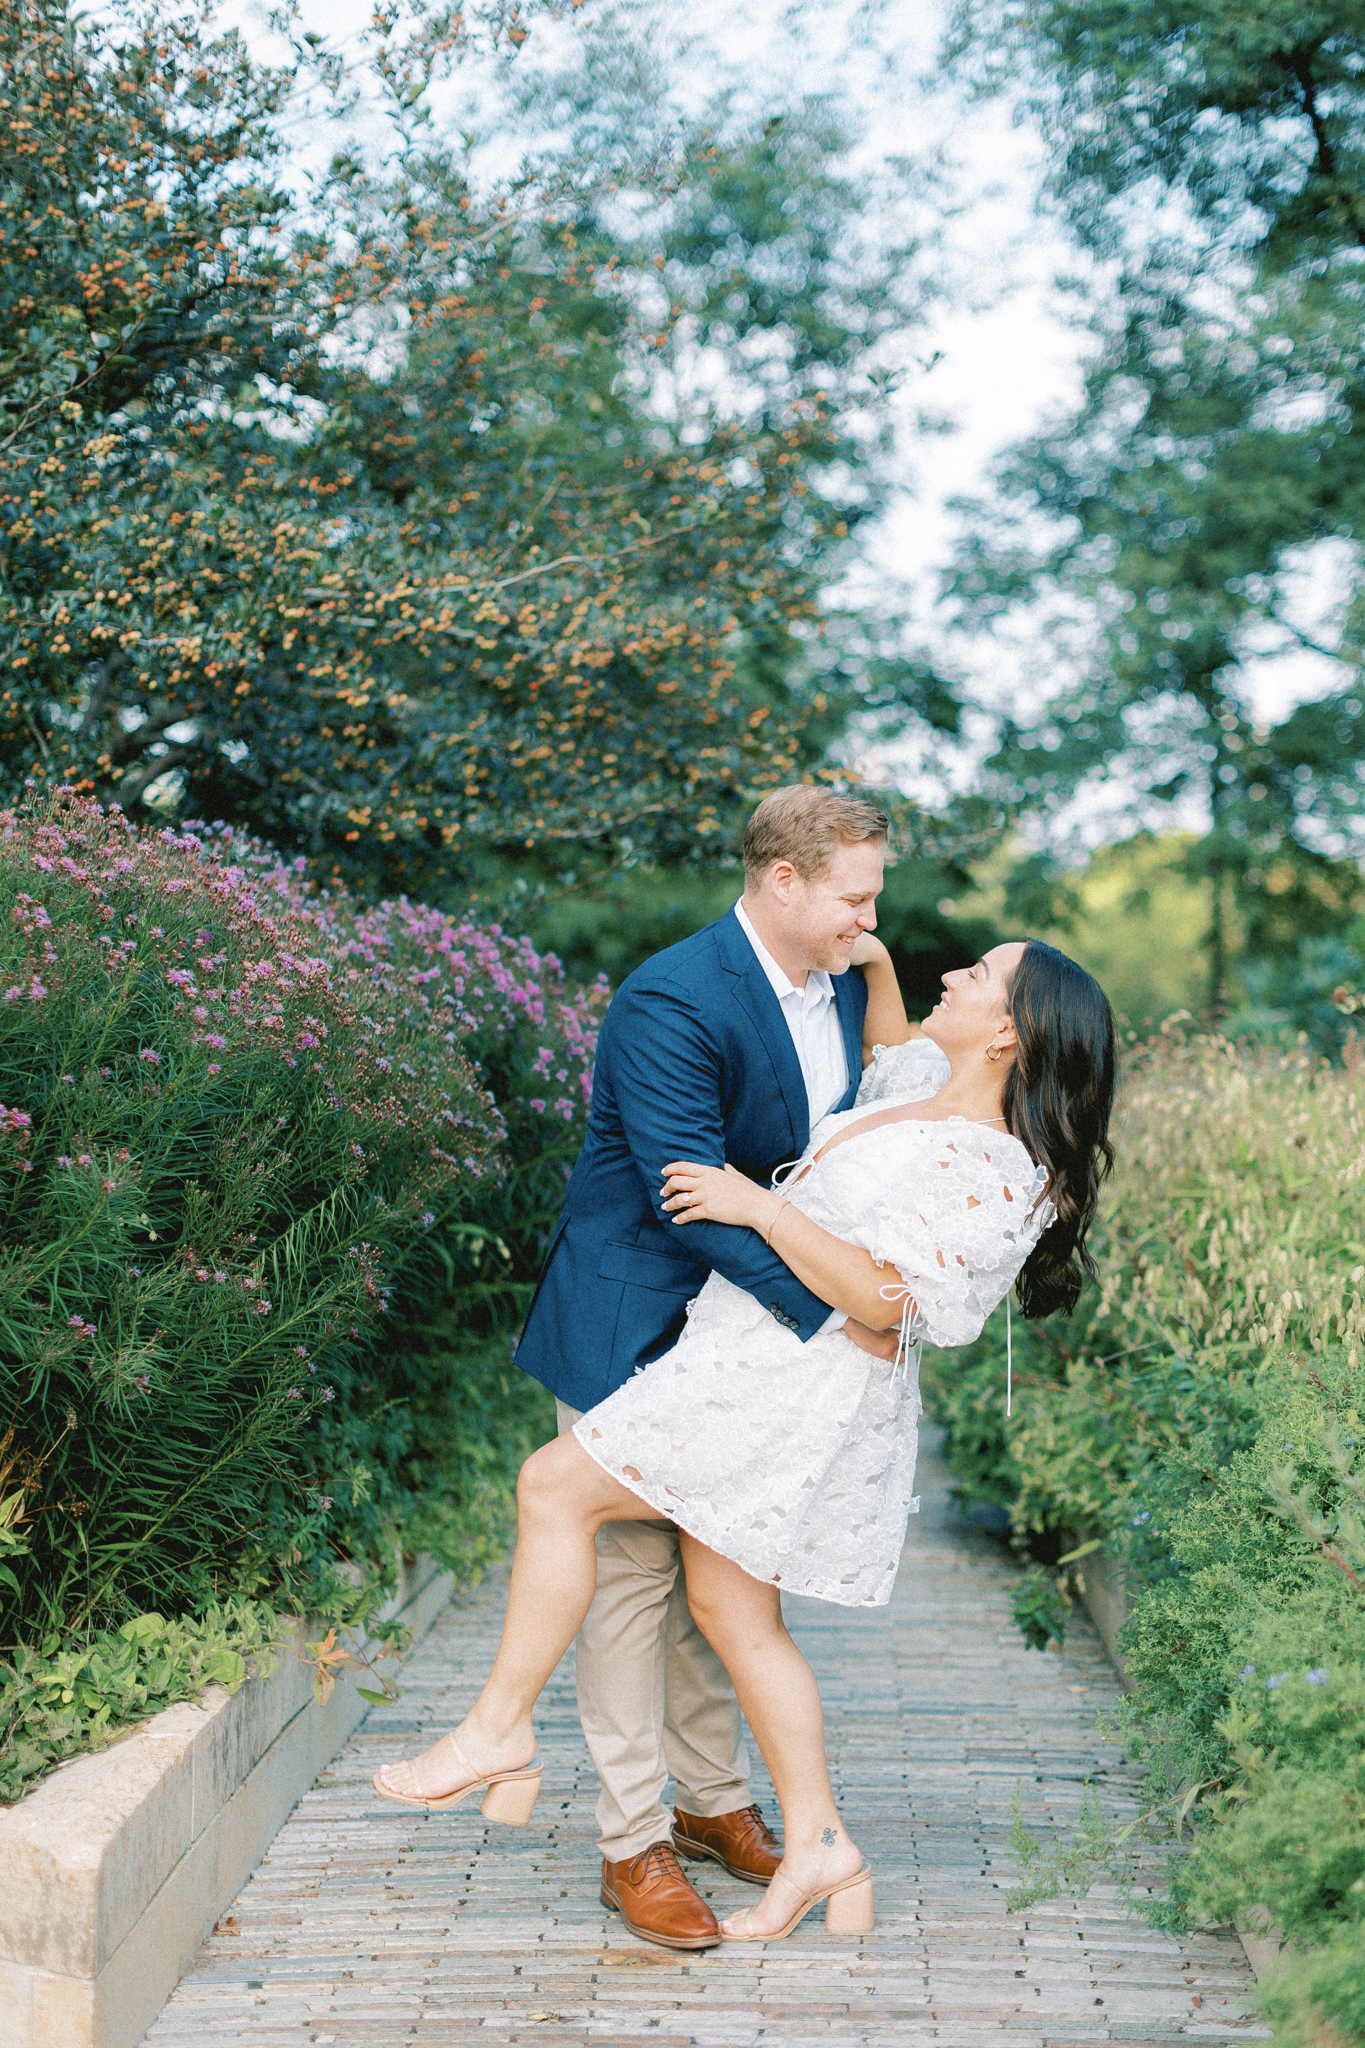 downtown-chicago-engagement-session-lurie-garden-art-institute-hayley-moore-photography